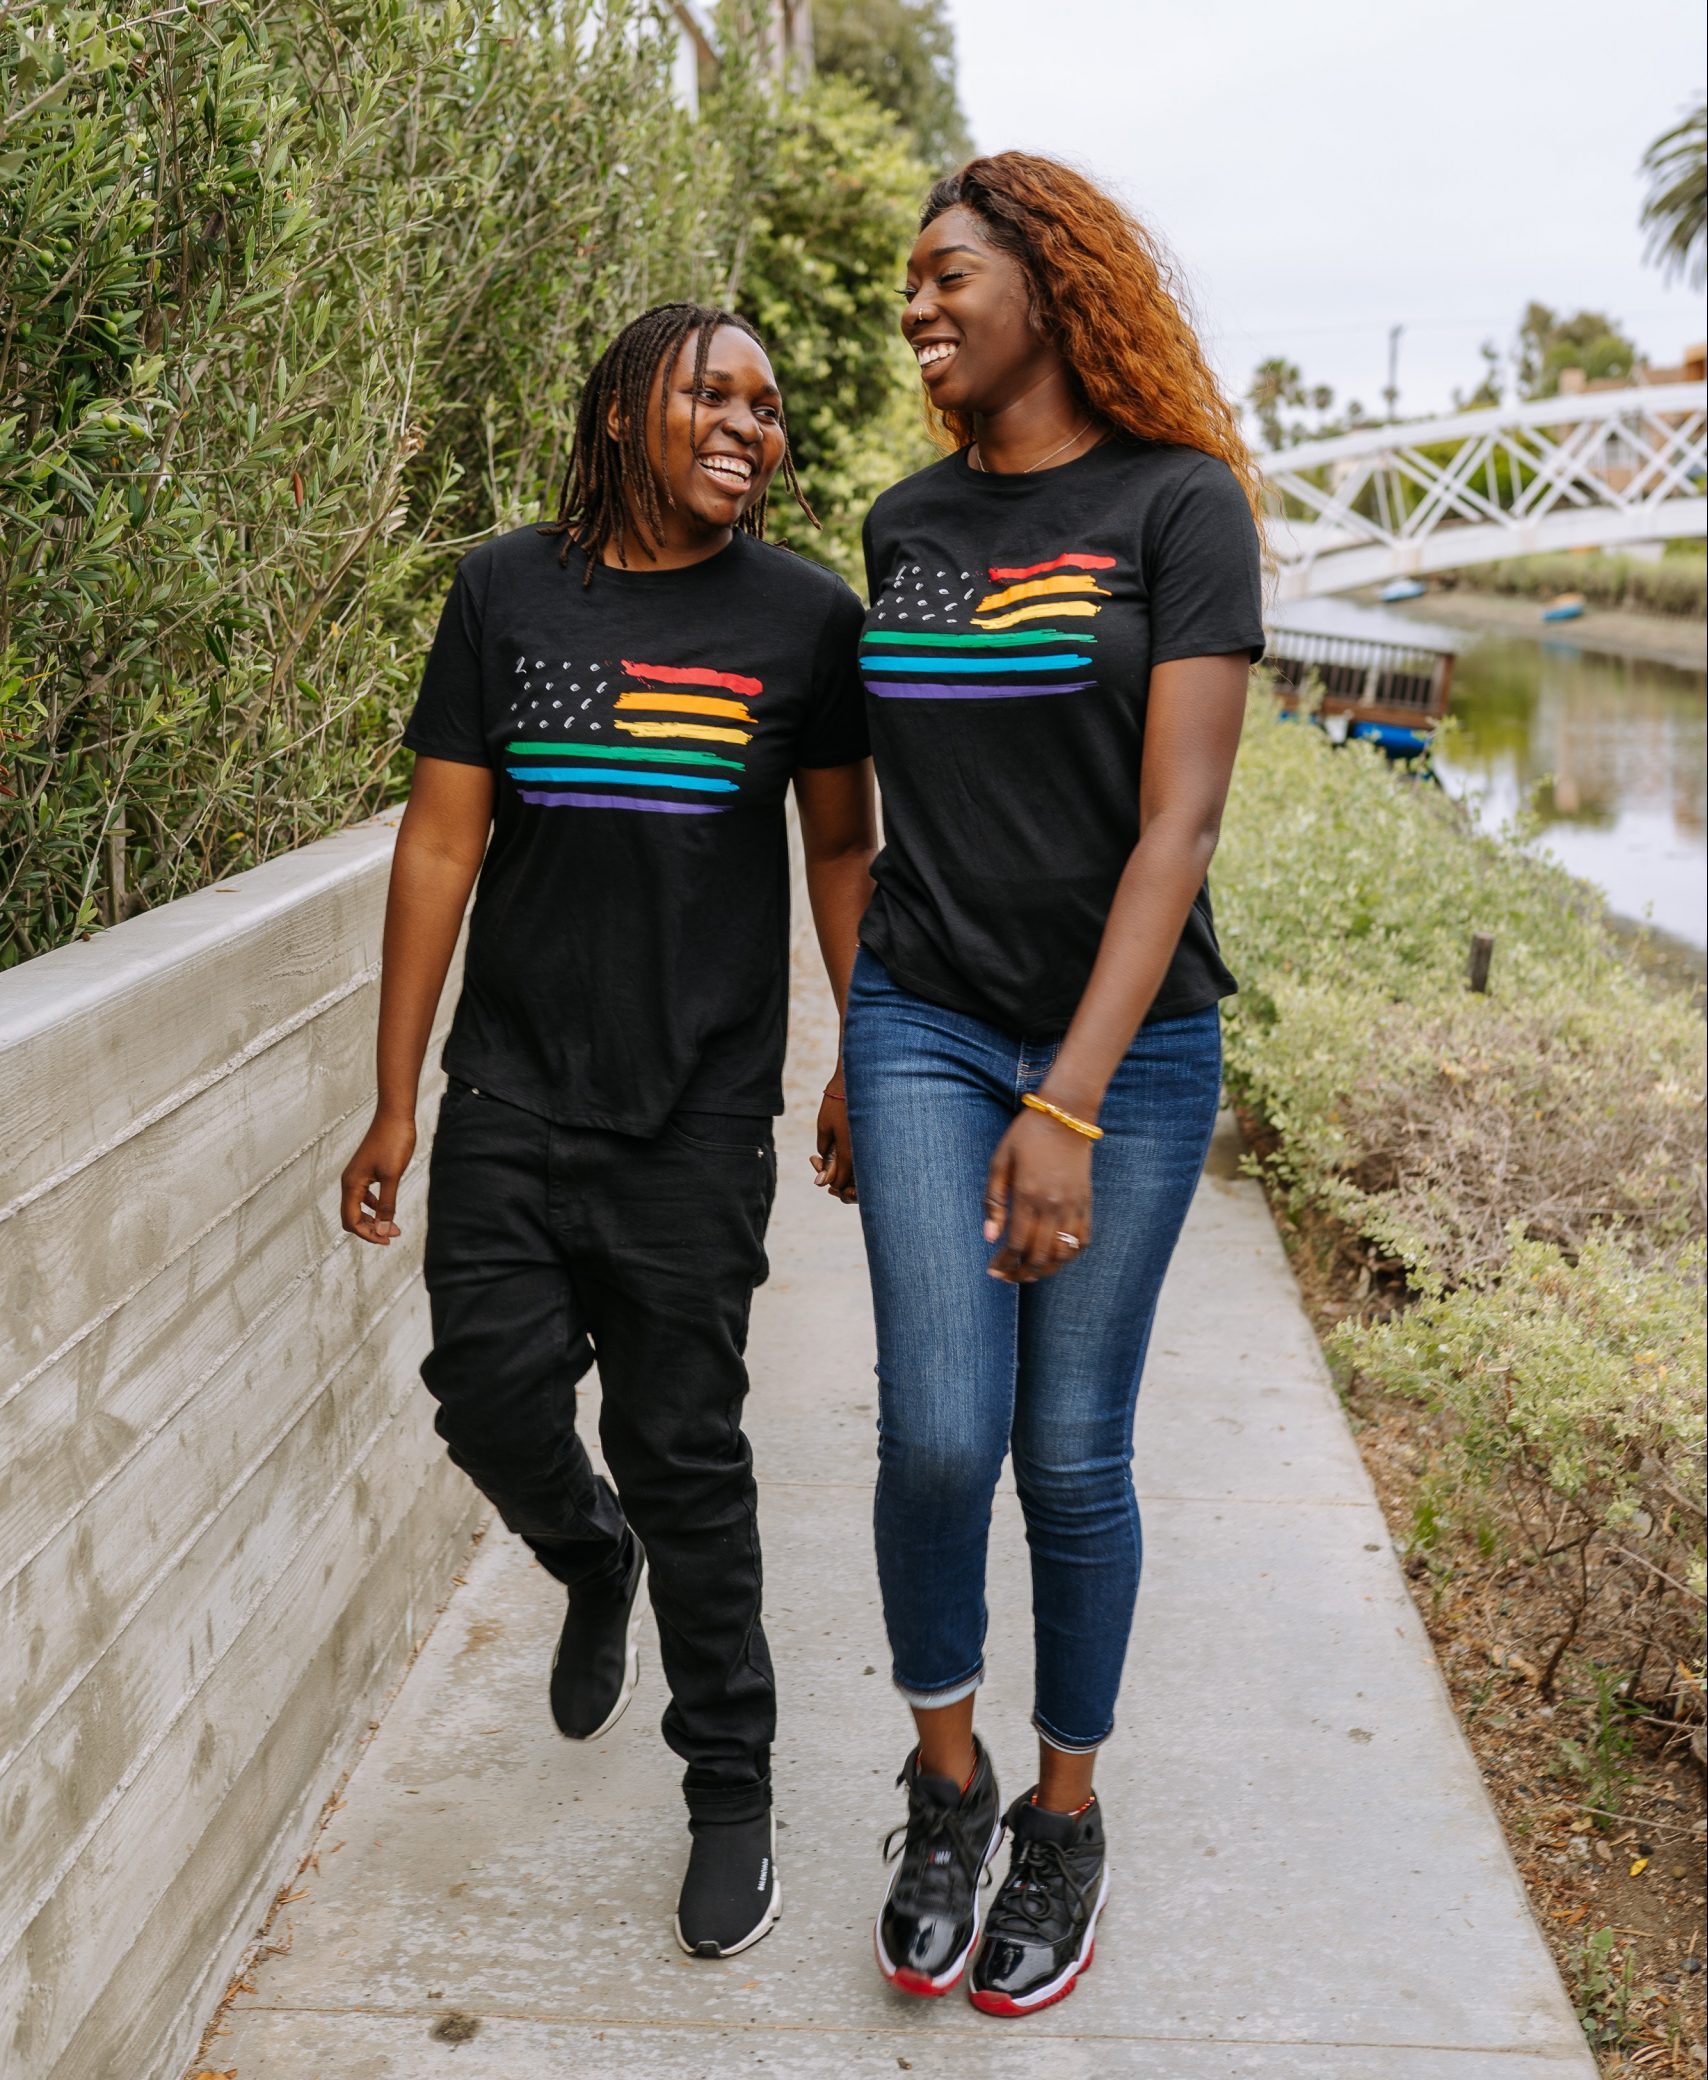 Two queer women of color wearing pride shirts walking on the street